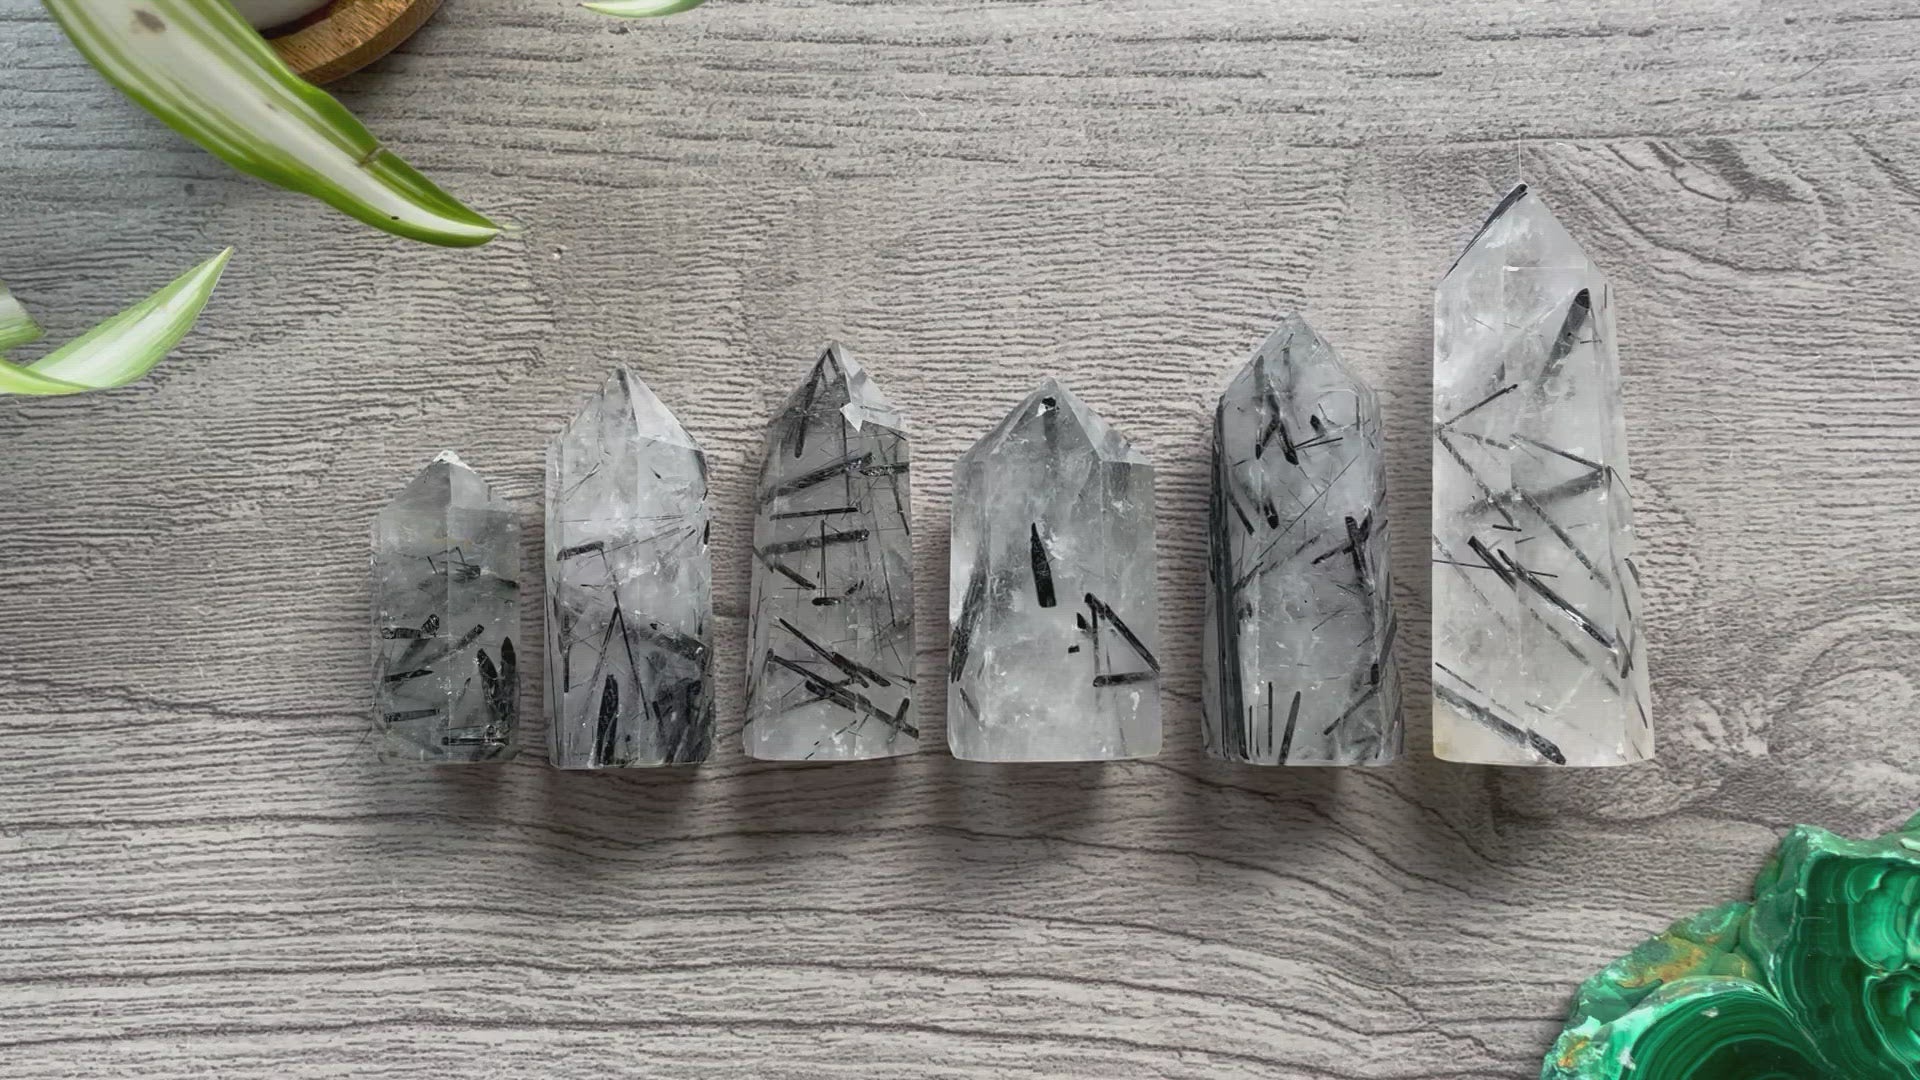 Pictured are various points of black tourmaline in quartz.